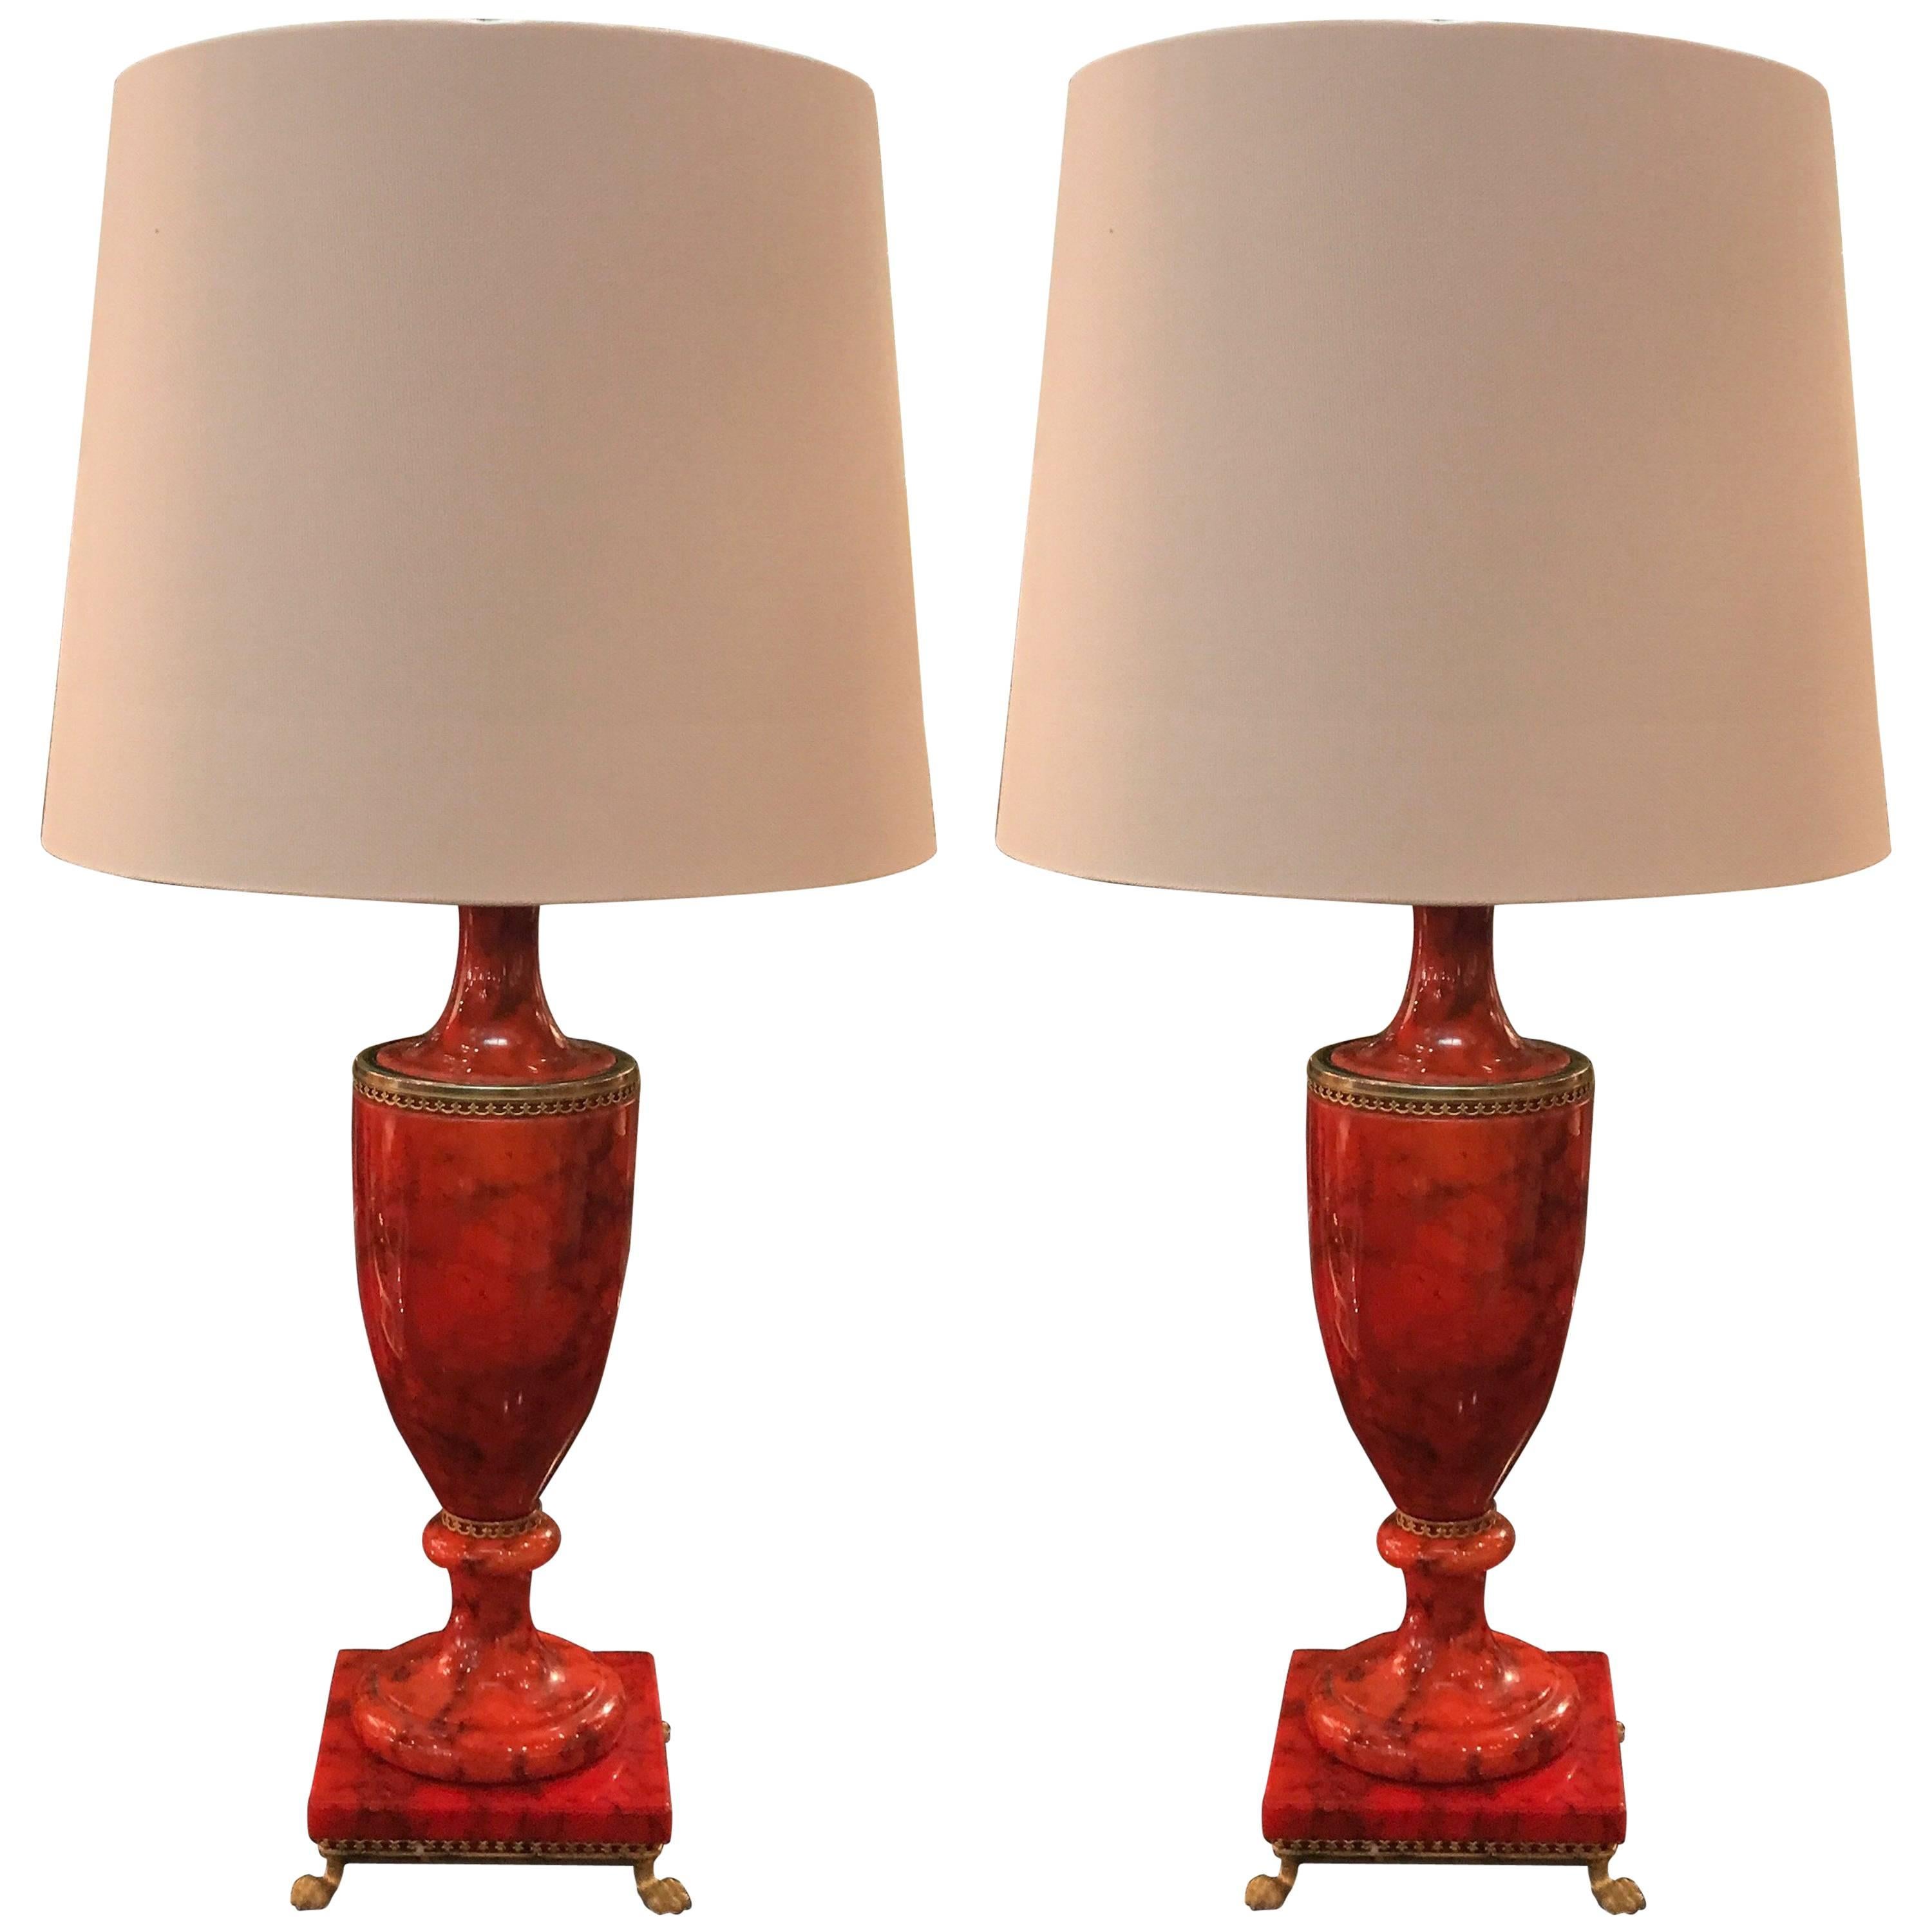 A Pair of Red Polished Italian Alabaster Urn Lamps